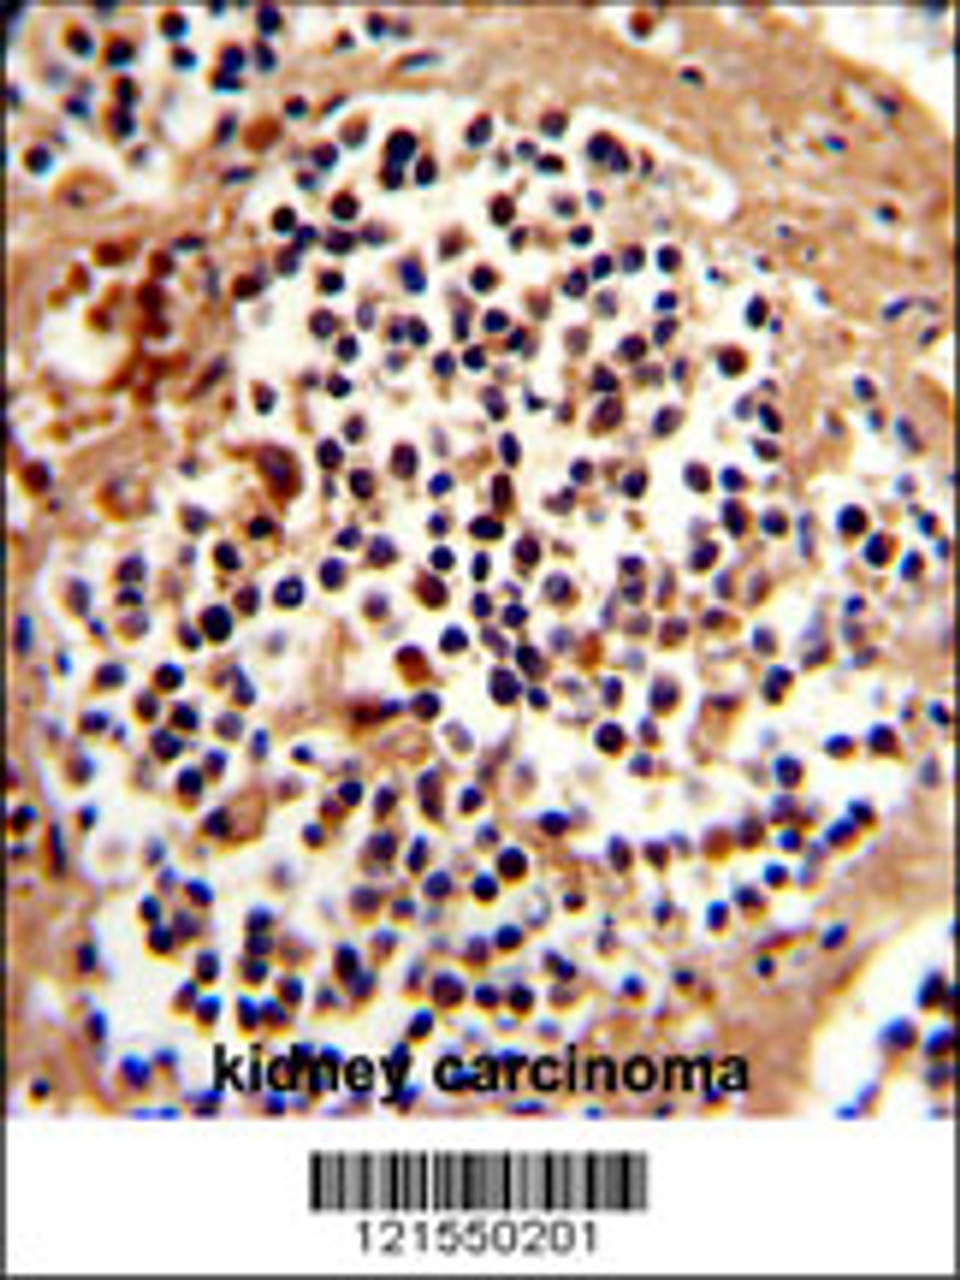 Formalin-fixed and paraffin-embedded human kidney carcinoma reacted with SERPINB7 Antibody, which was peroxidase-conjugated to the secondary antibody, followed by DAB staining.